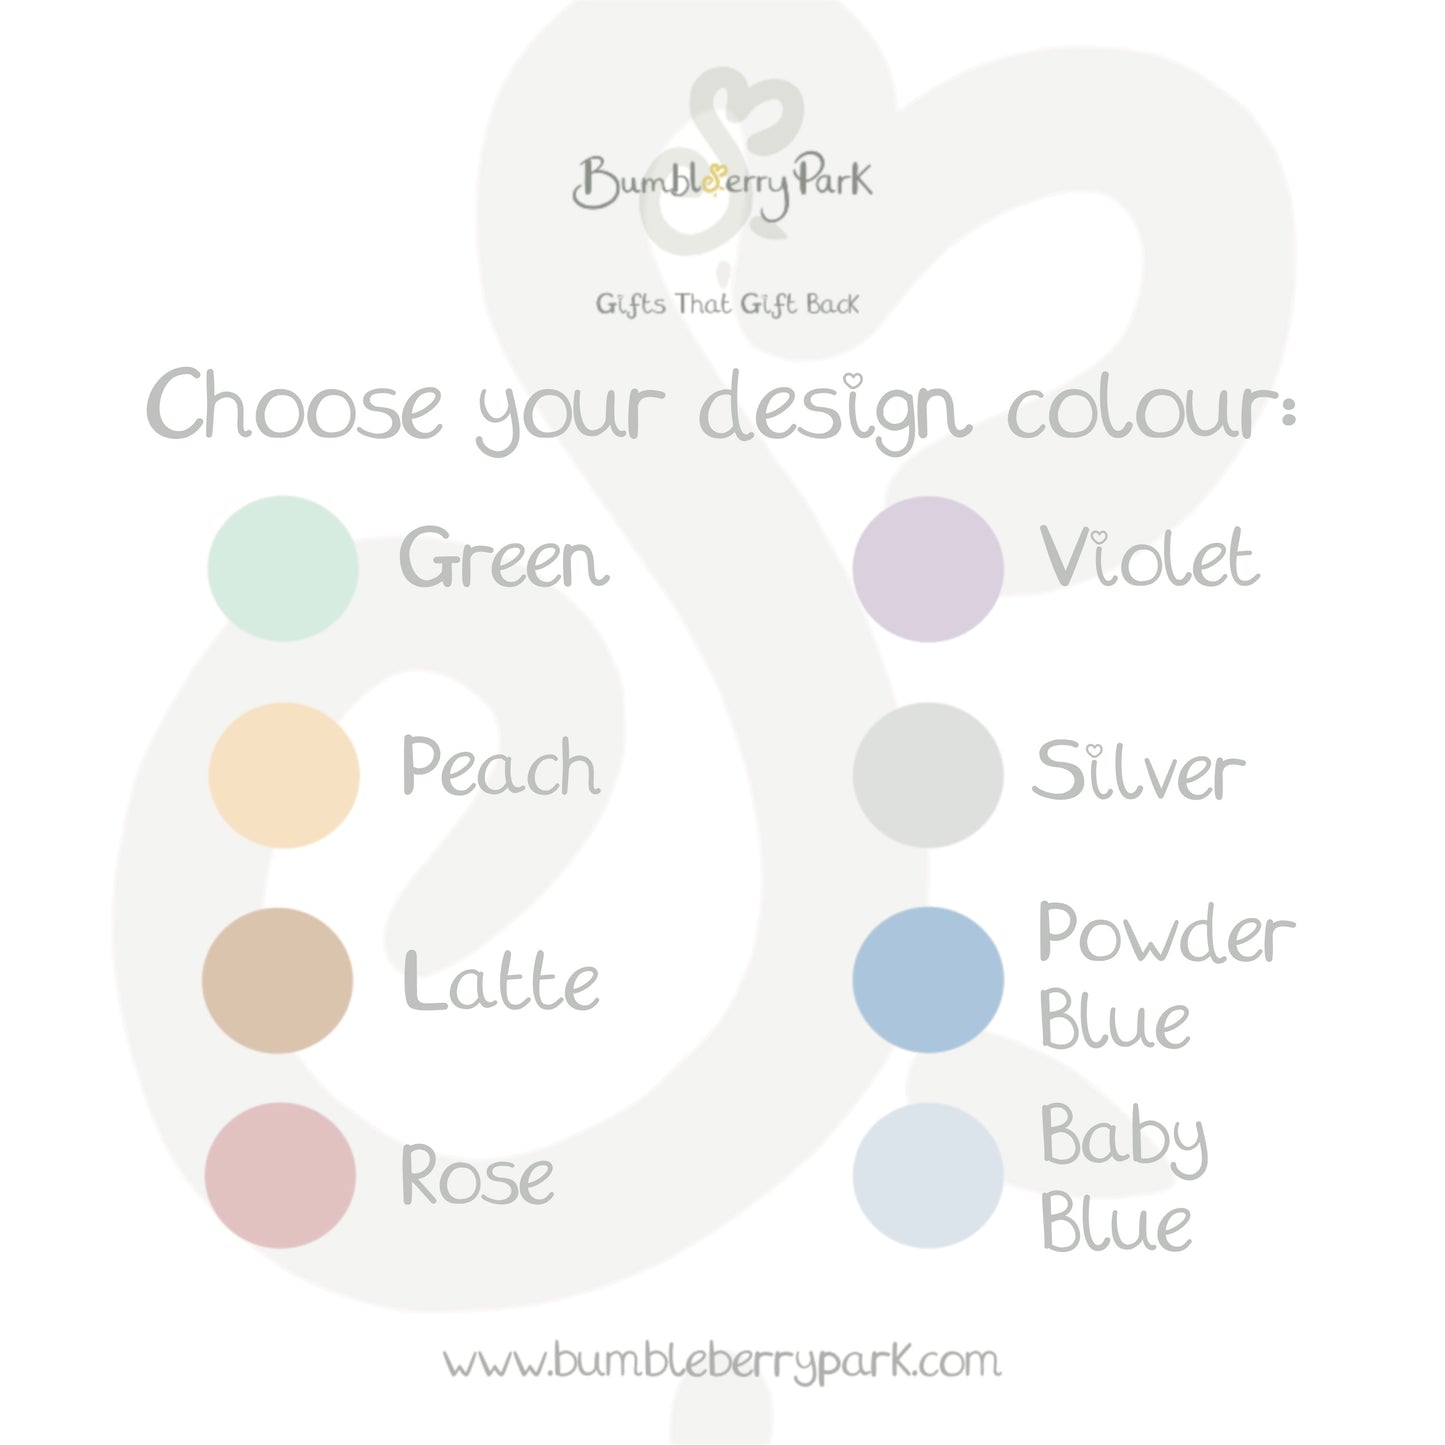 colour selection to choose from for printed t-shirt design